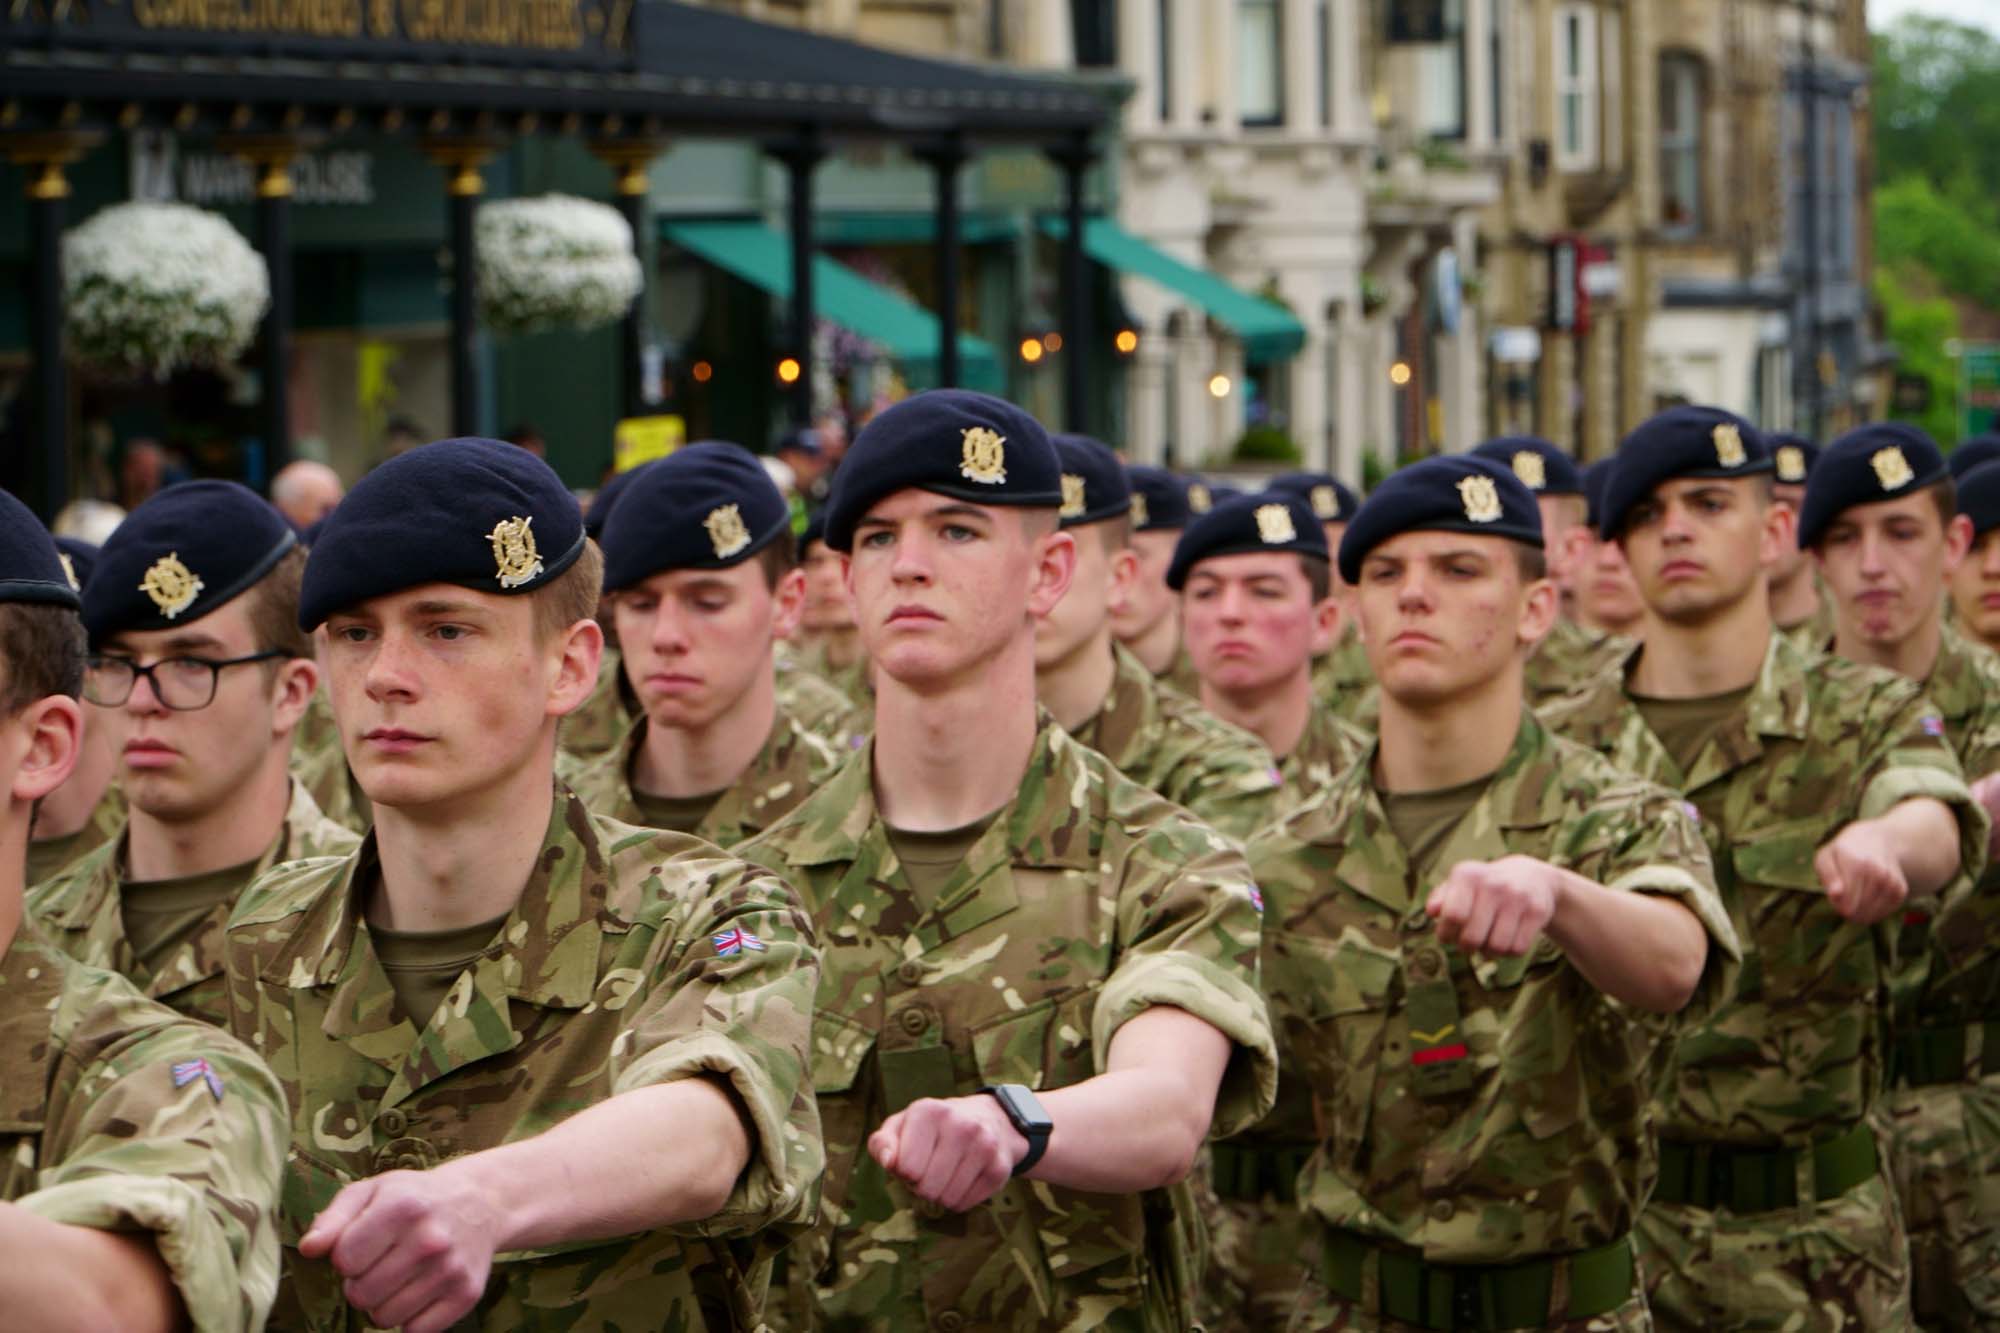 Junior soldiers exercise Freedom of Harrogate